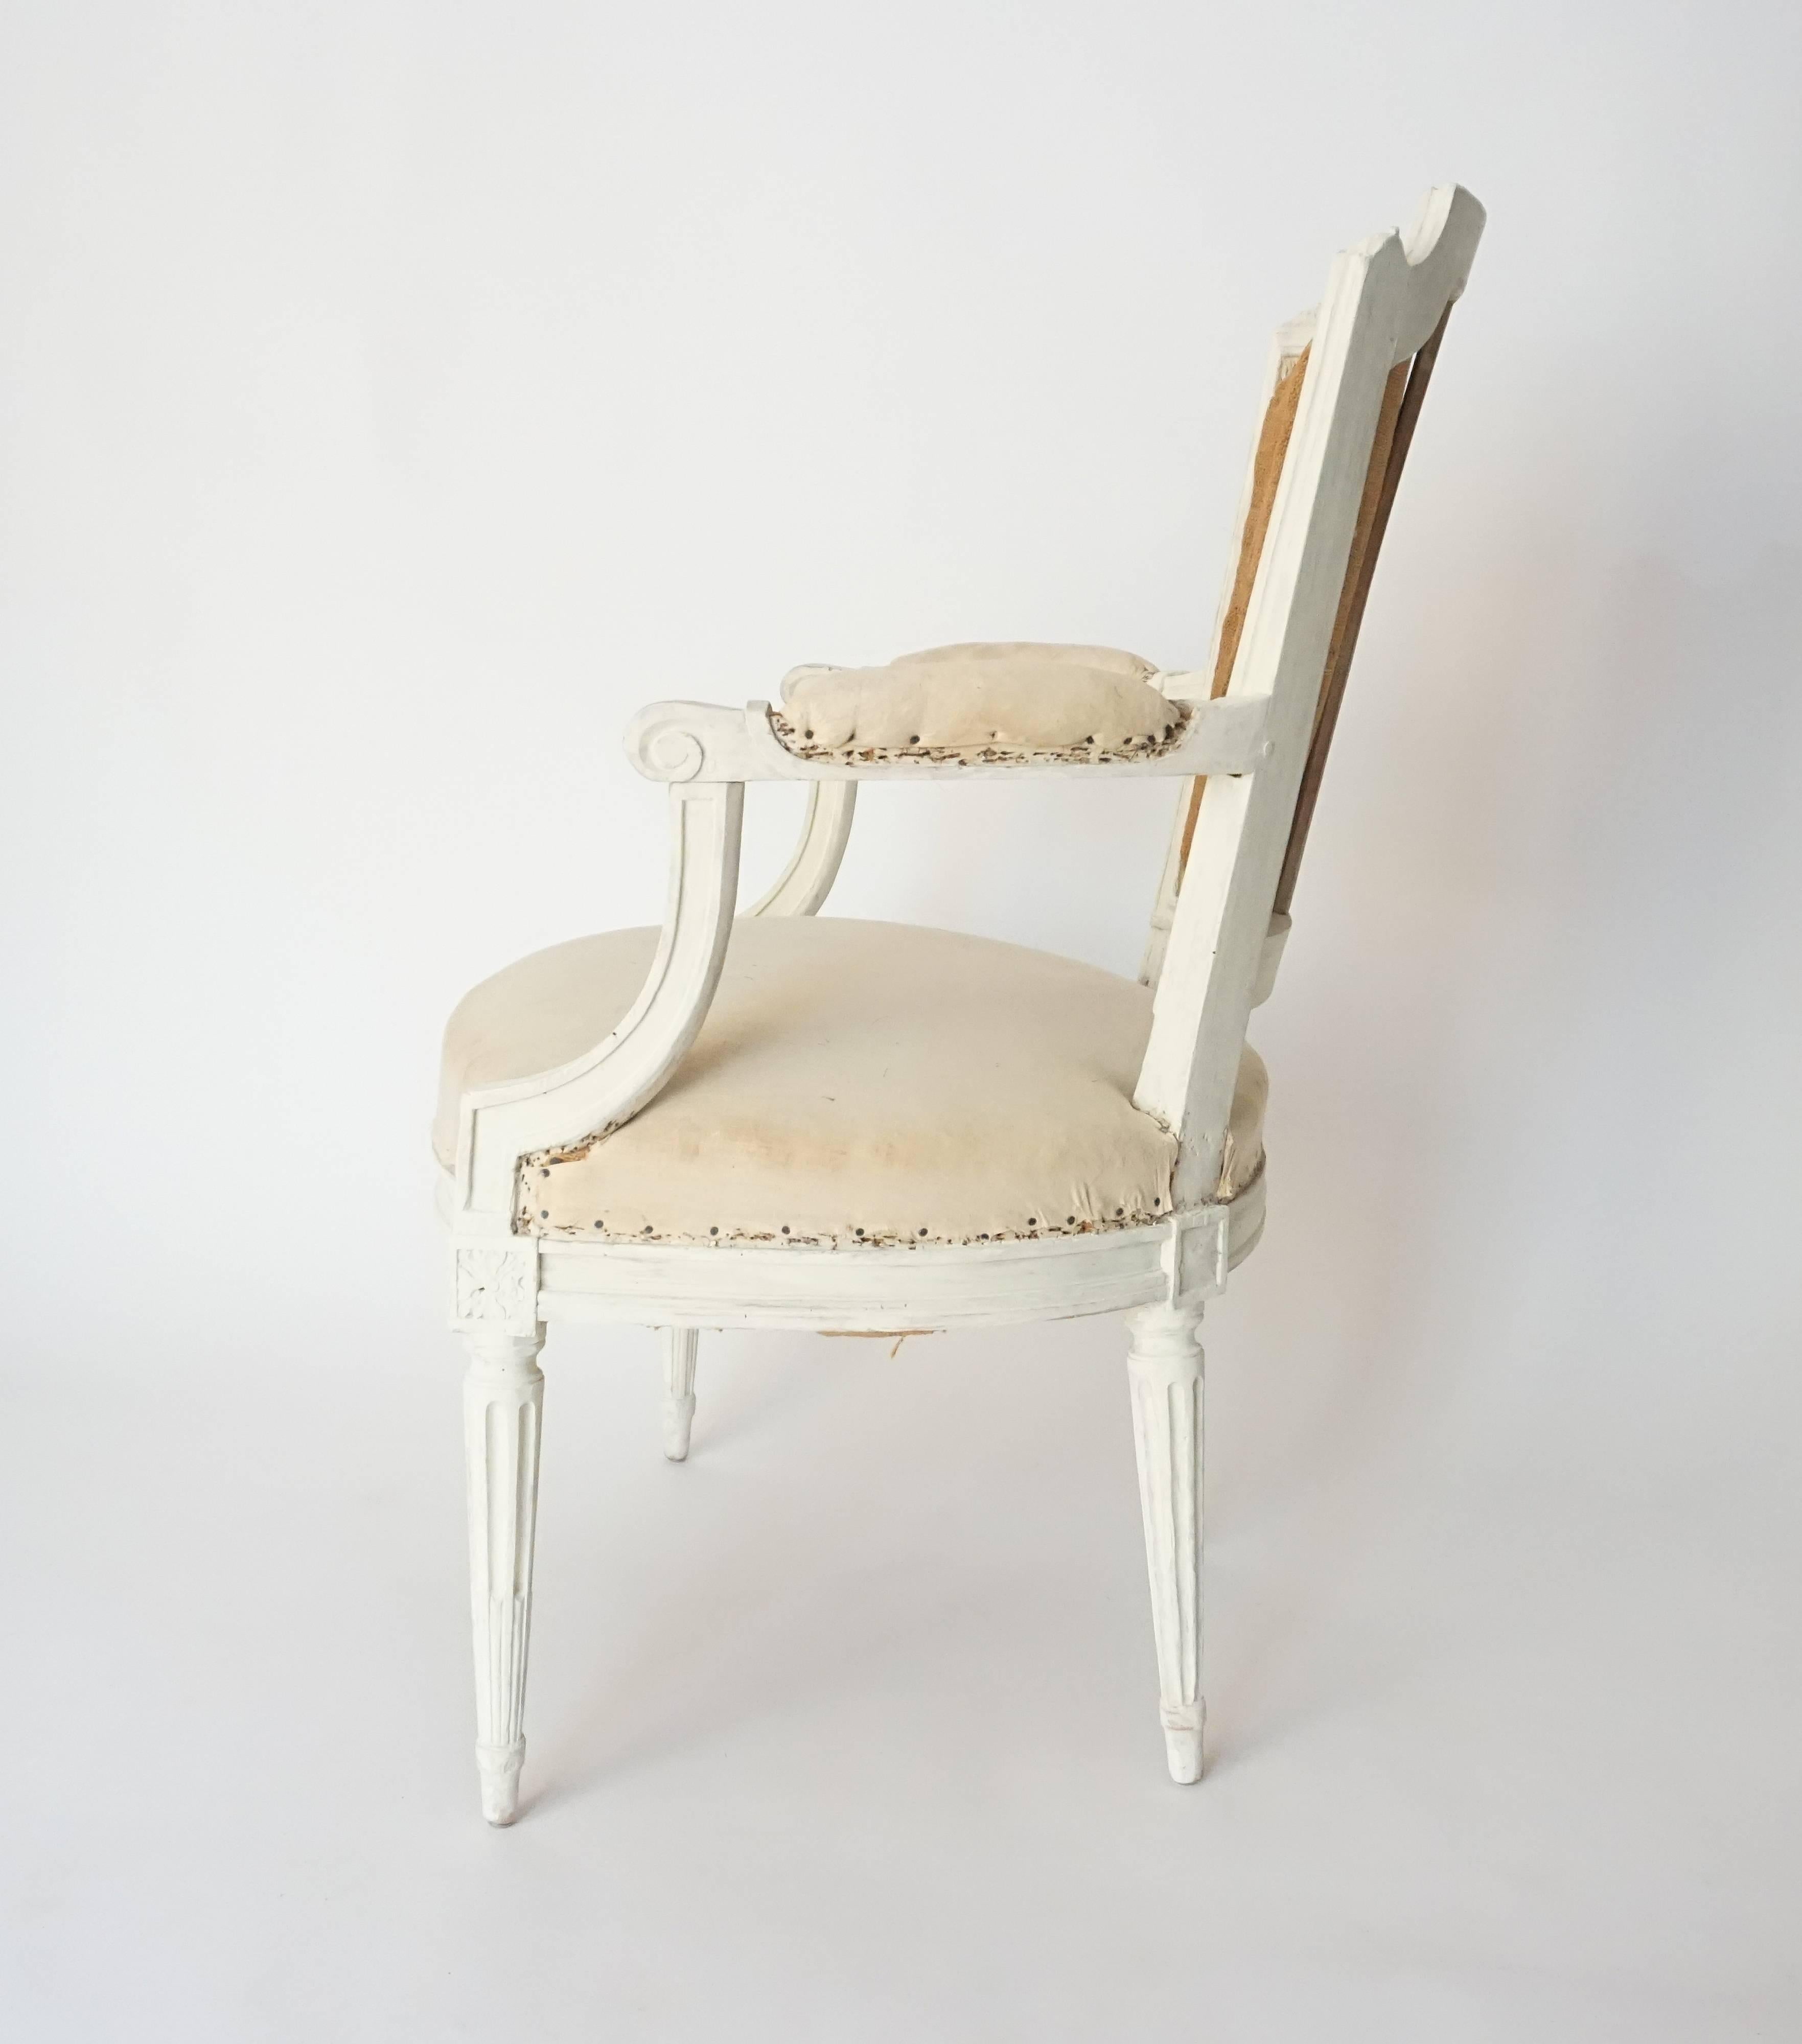 18th Century Louis XVI Fauteuil or Armchair in Original Paint, Stamped, France, circa 1780